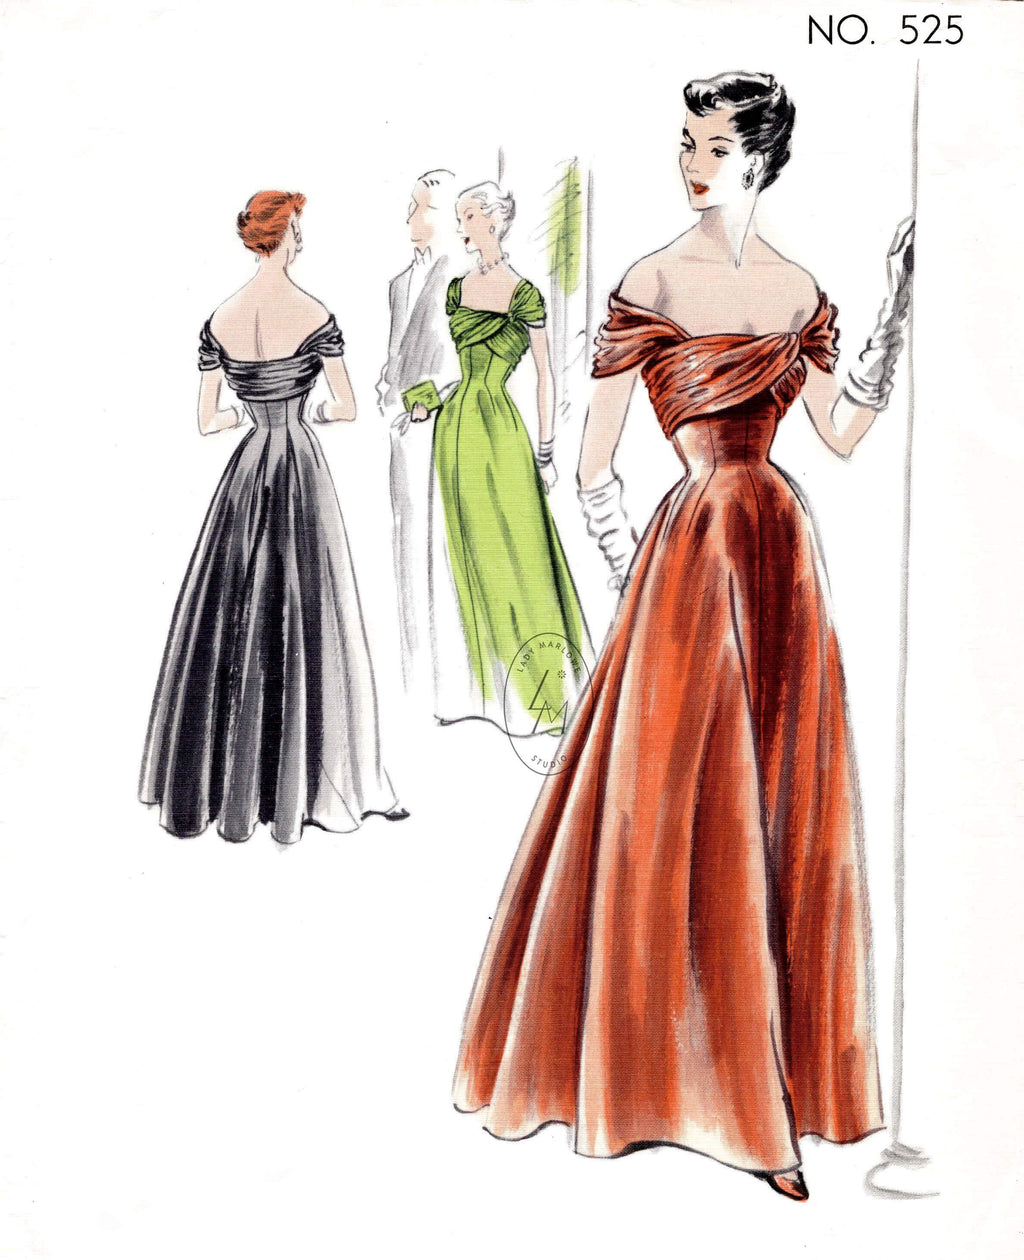 Vintage Sewing Pattern Template & Scale Rulers 1950s Evening Ball Gown in  Any Size PLUS Size Included 5712 INSTANT DOWNLOAD - Etsy